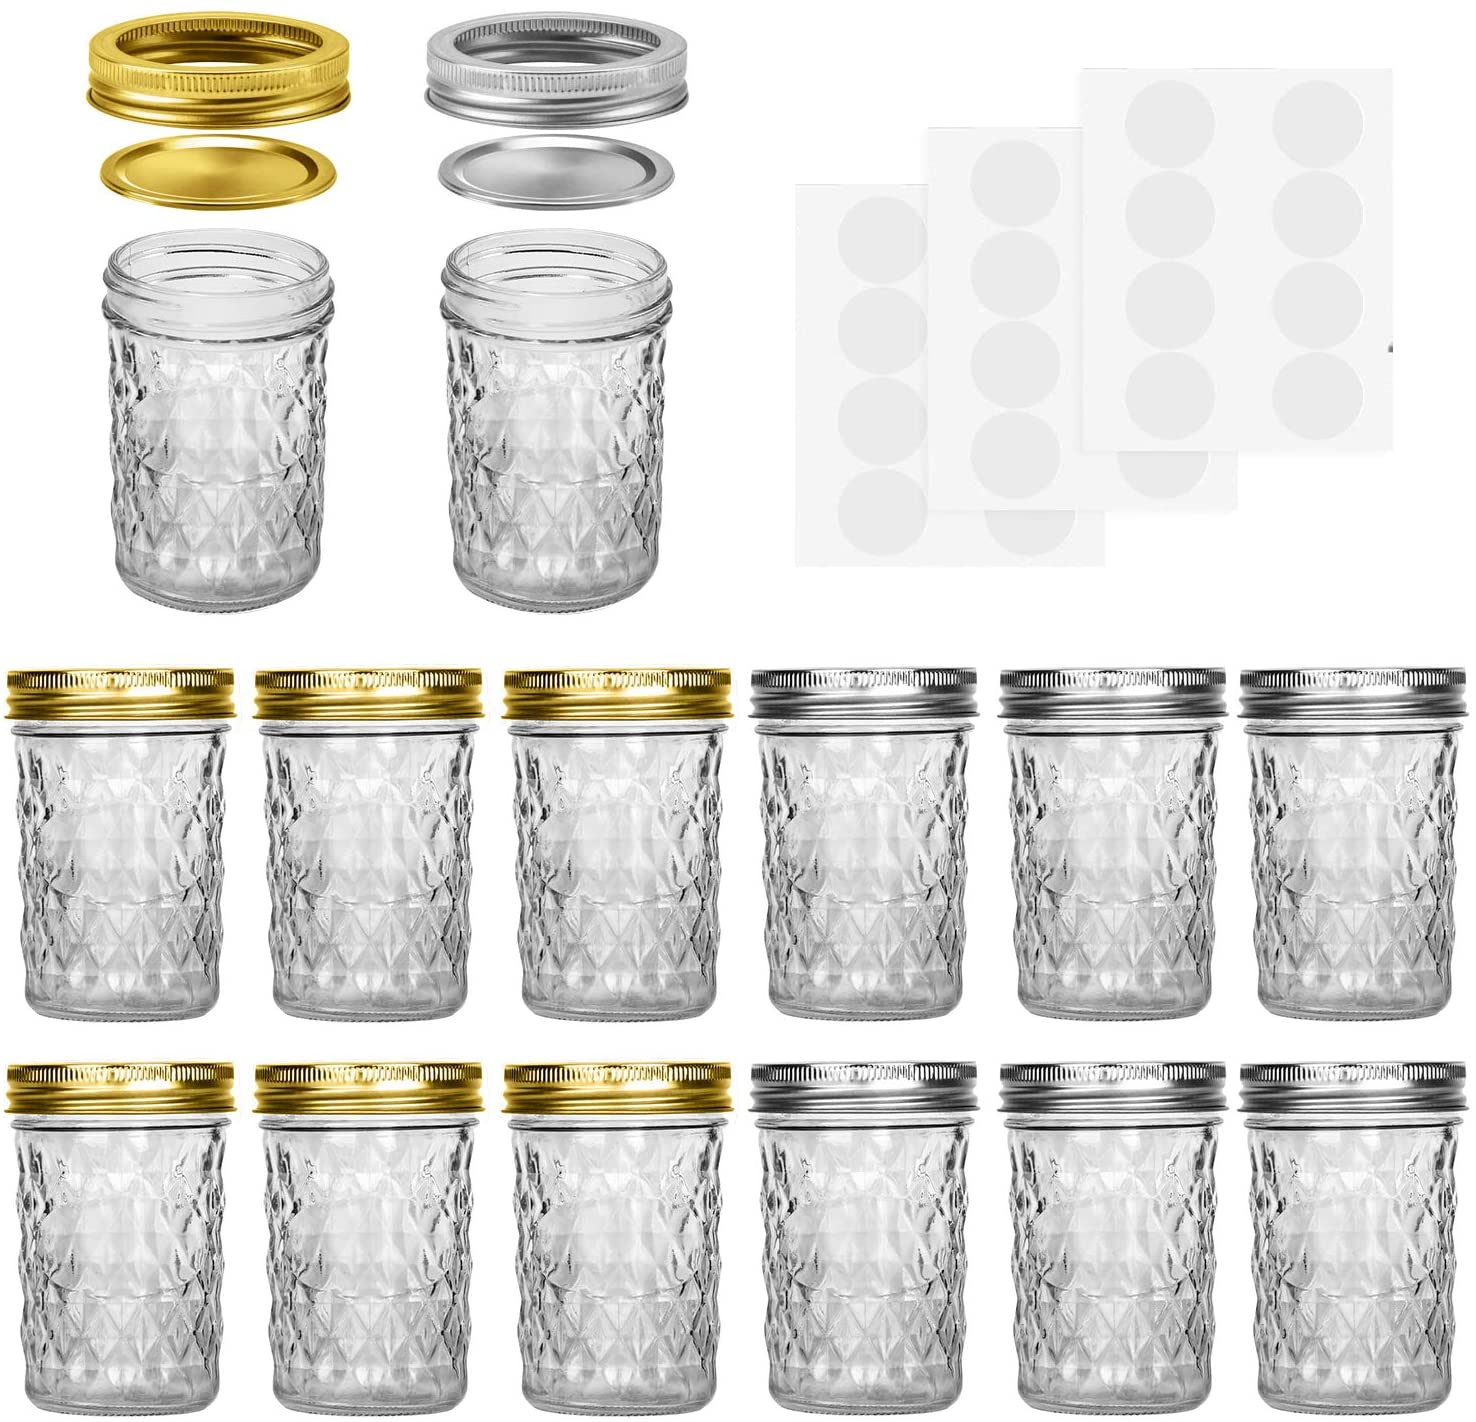 12-Pack, 8 oz Mason Jars for With Canning Lids, Amazon.com - $14.69